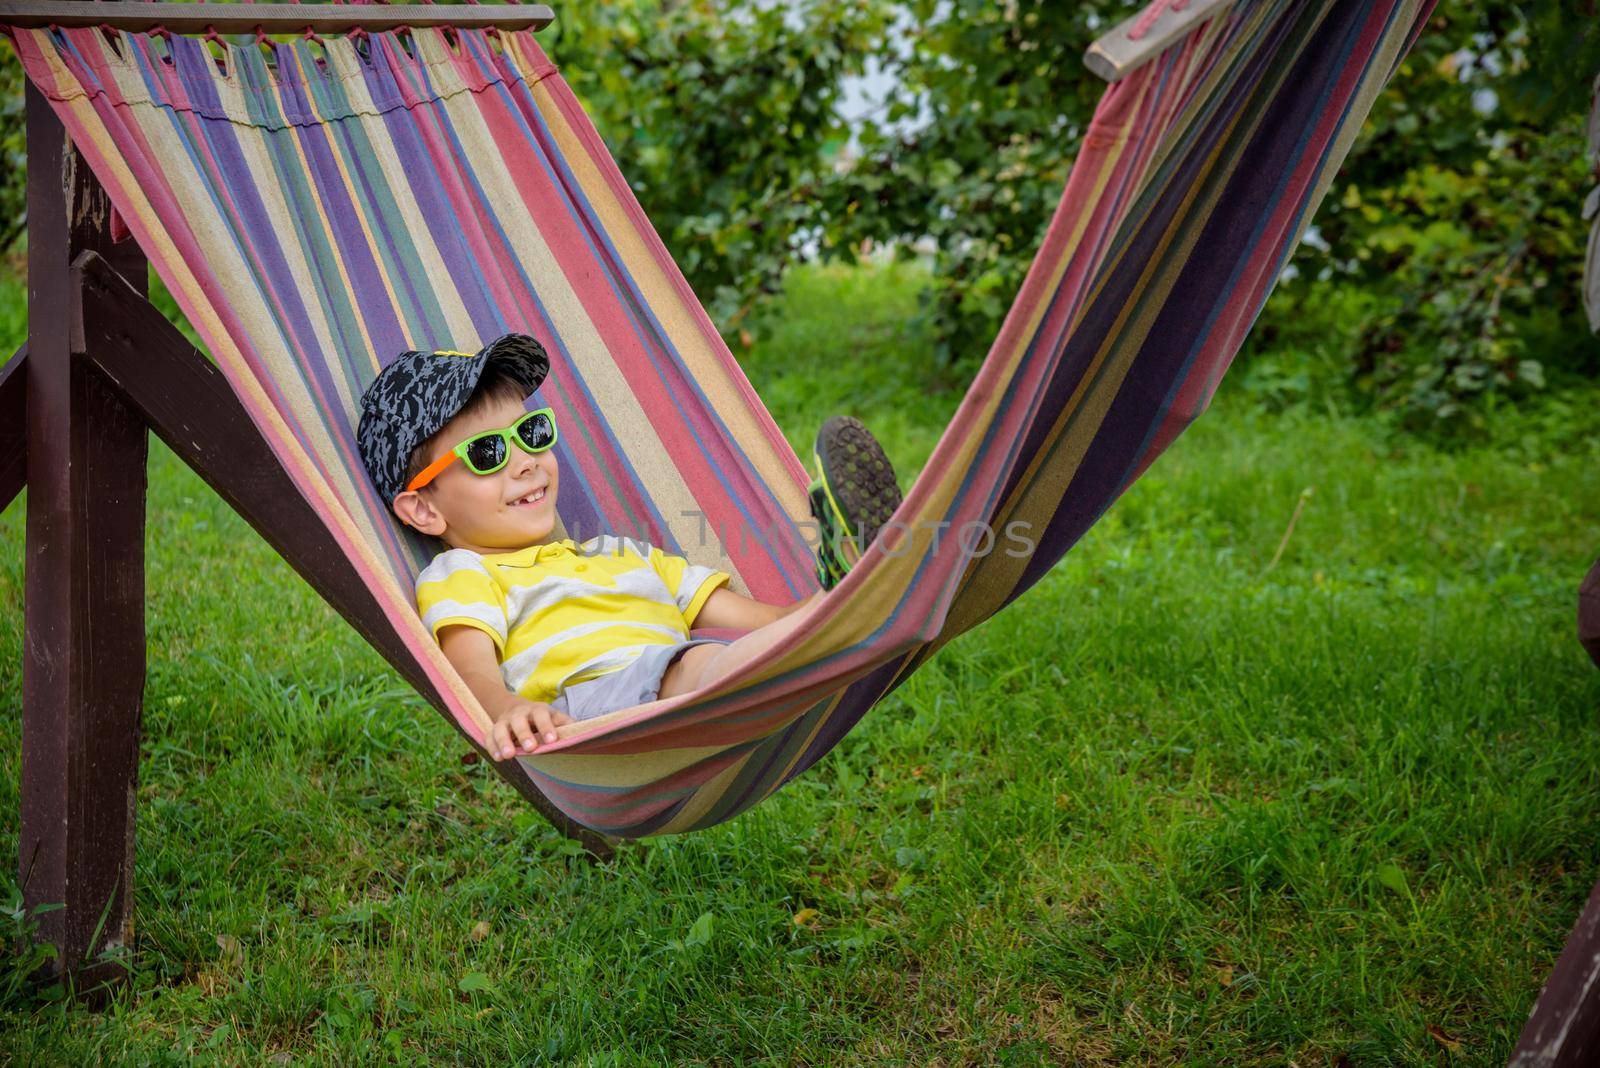 Cute little Caucasian boy relaxing and having fun in multicolored hammock in backyard or outdoor playground. Summer active leisure for kids. Child swinging on hammock. Activities for children by Kobysh